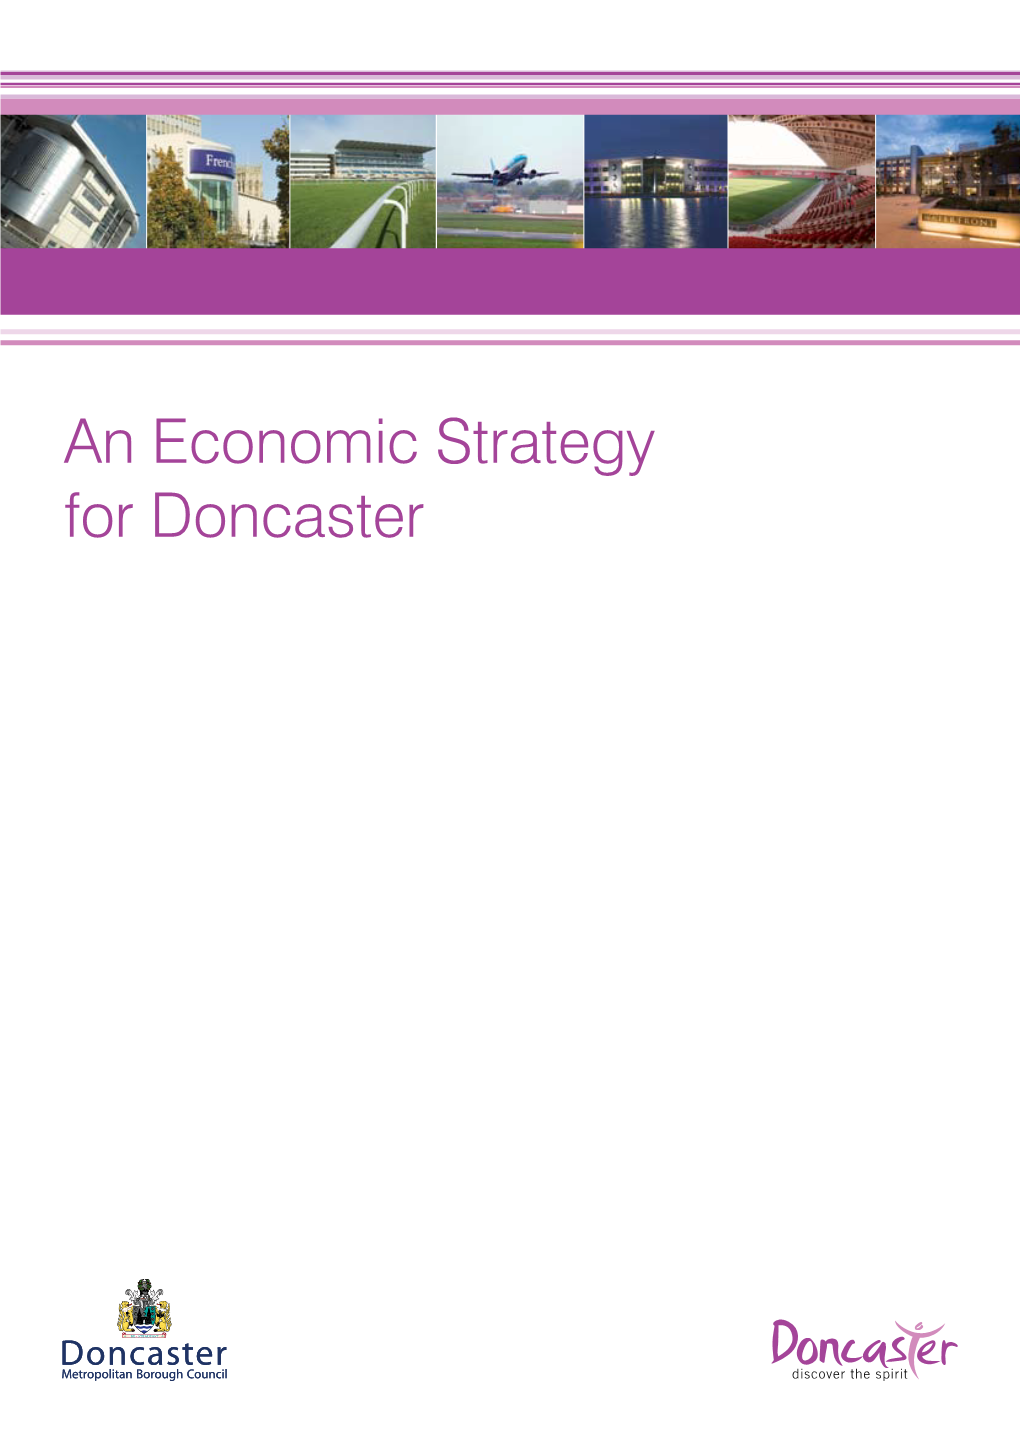 An Economic Strategy for Doncaster Contents